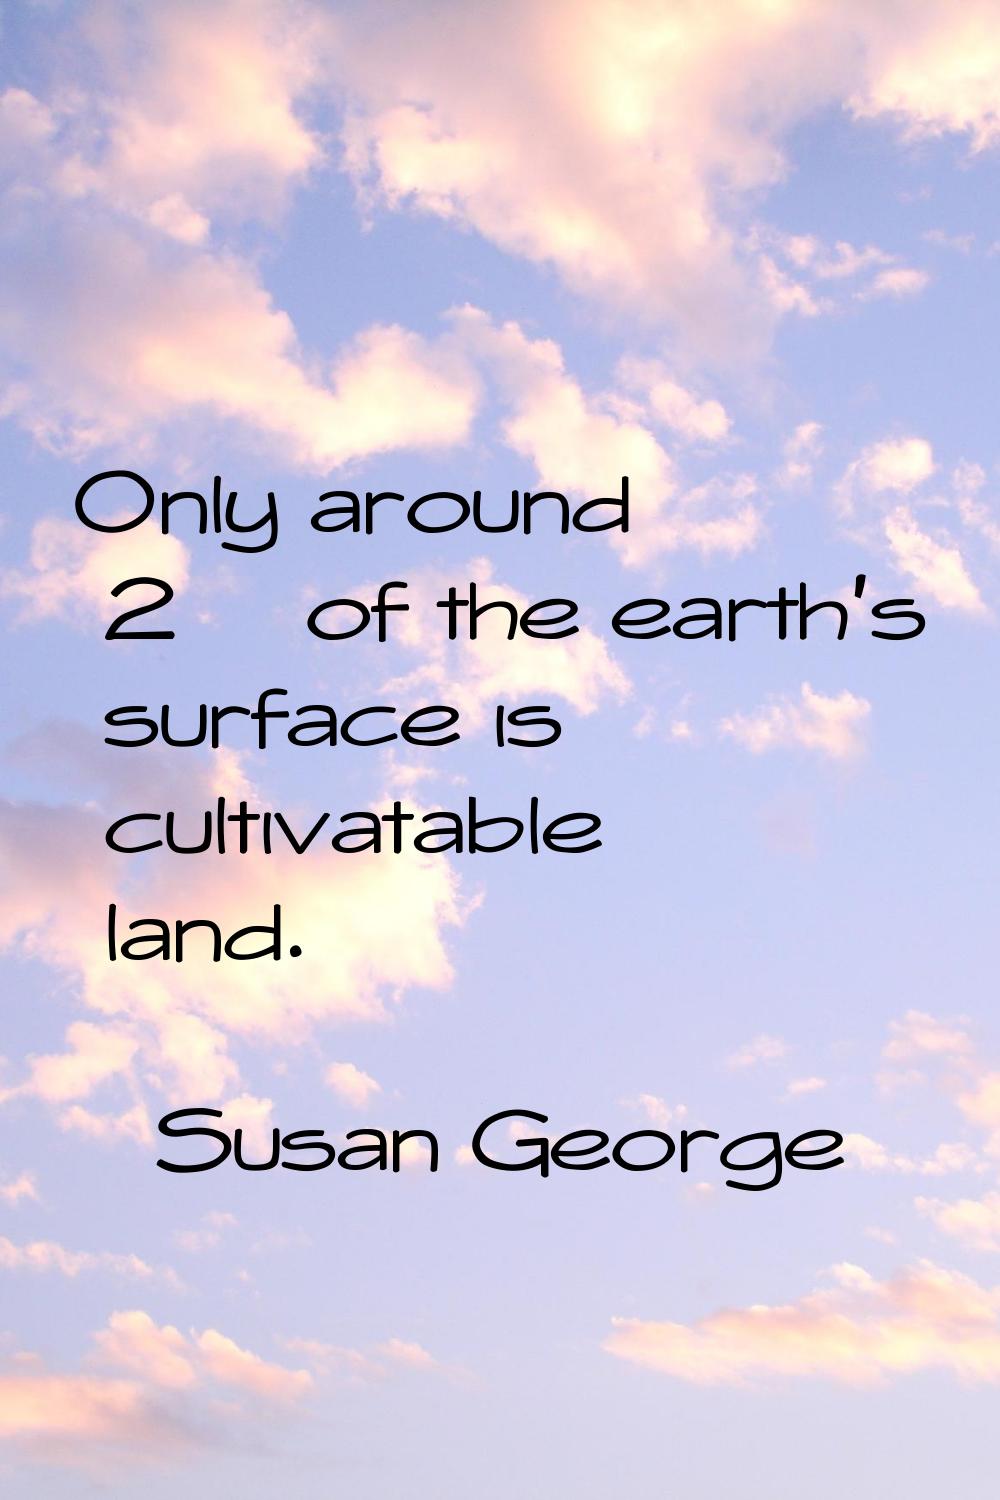 Only around 2% of the earth's surface is cultivatable land.